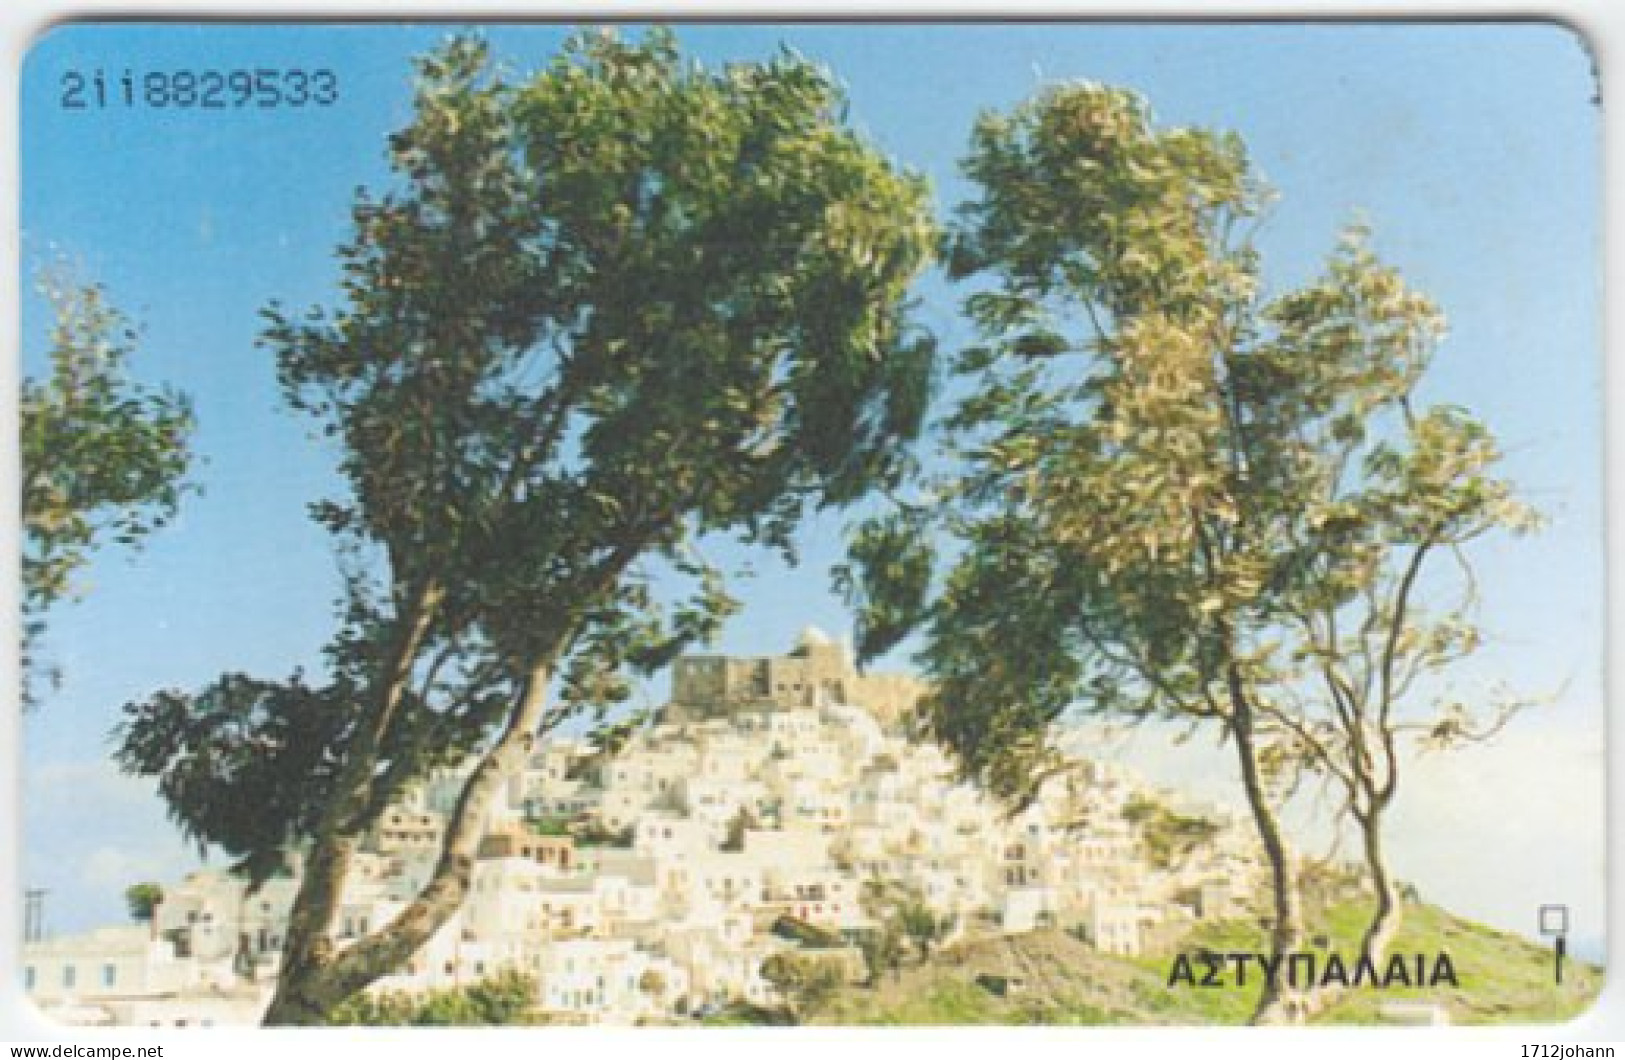 GREECE C-496 Chip OTE - View, Village / Plant, Tree - Used - Griechenland